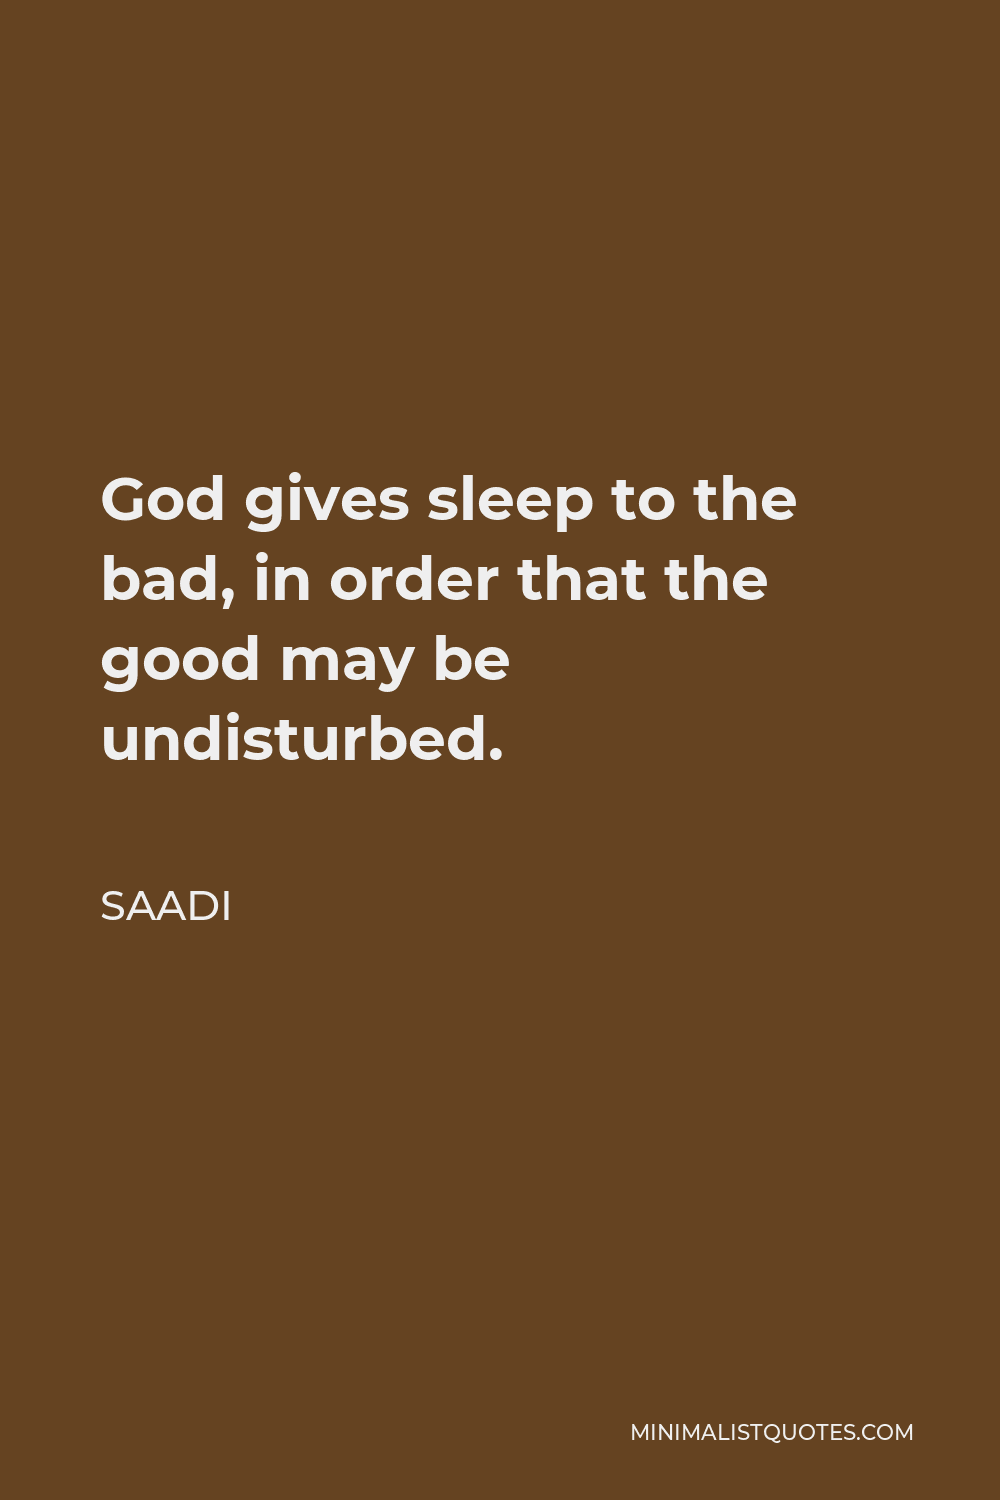 Saadi Quote - God gives sleep to the bad, in order that the good may be undisturbed.